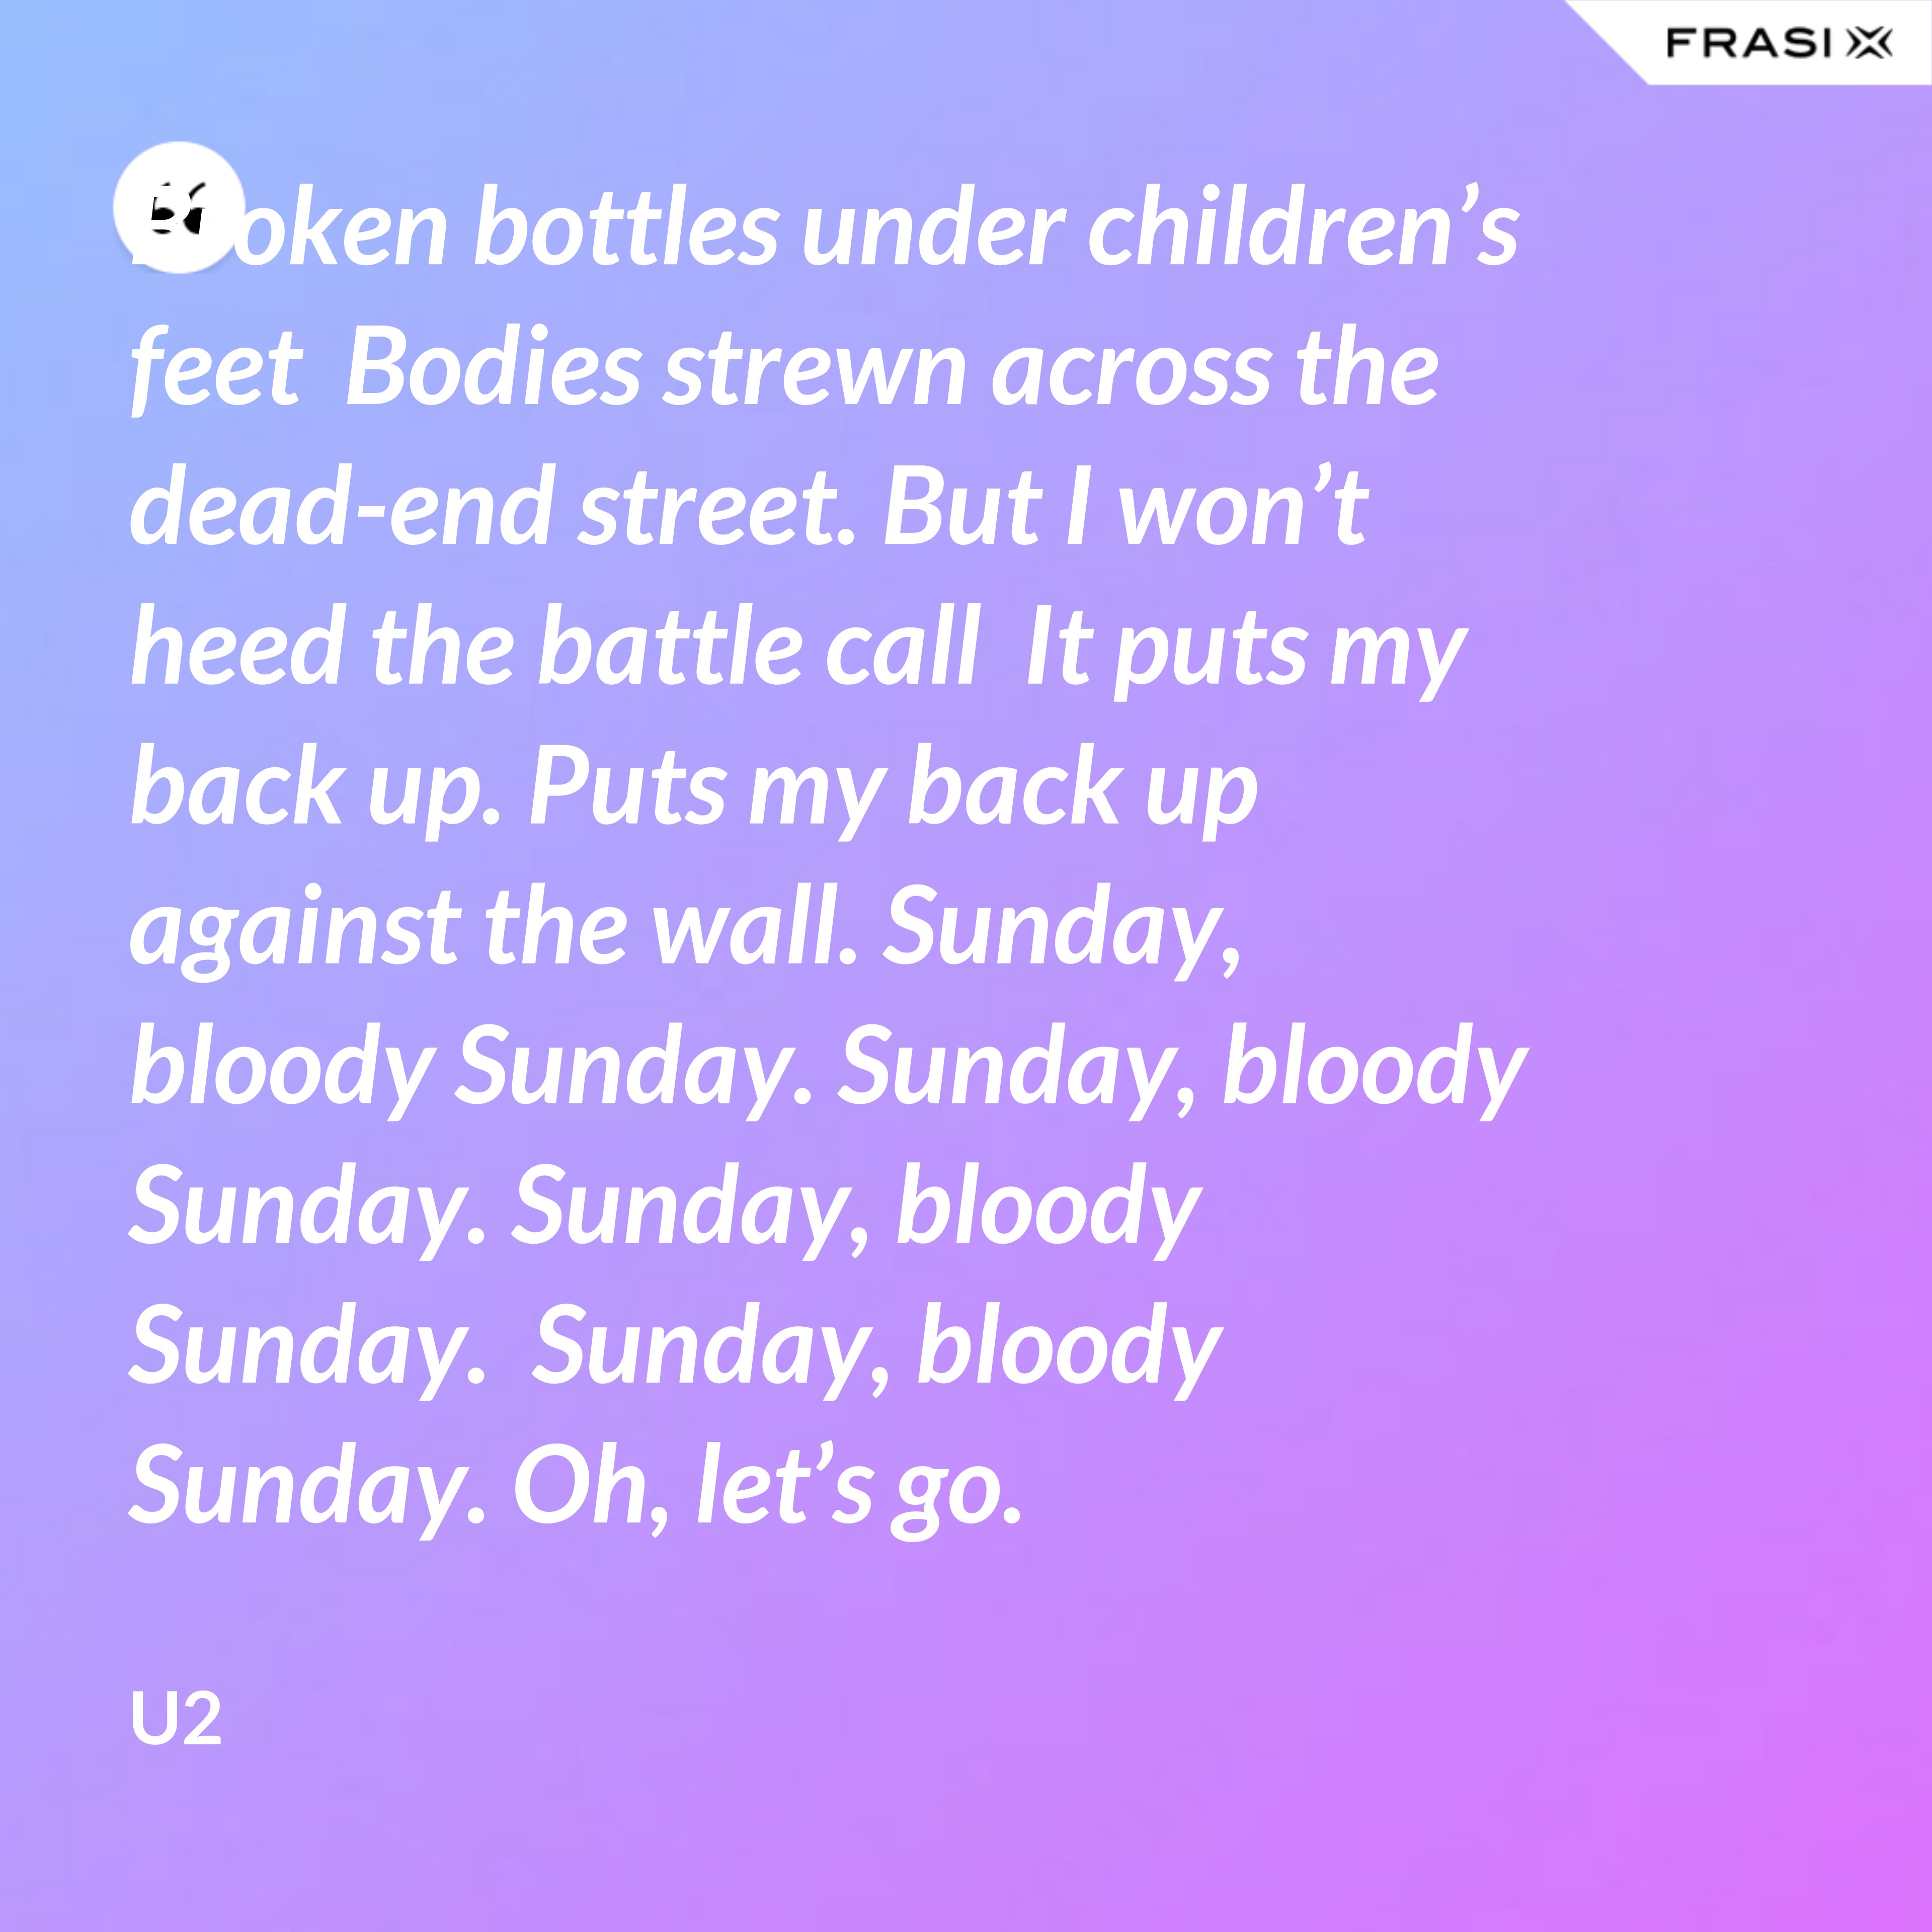 Broken bottles under children’s feet  Bodies strewn across the dead-end street. But I won’t heed the battle call  It puts my back up. Puts my back up against the wall. Sunday, bloody Sunday. Sunday, bloody Sunday. Sunday, bloody Sunday.  Sunday, bloody Sunday. Oh, let’s go. - U2